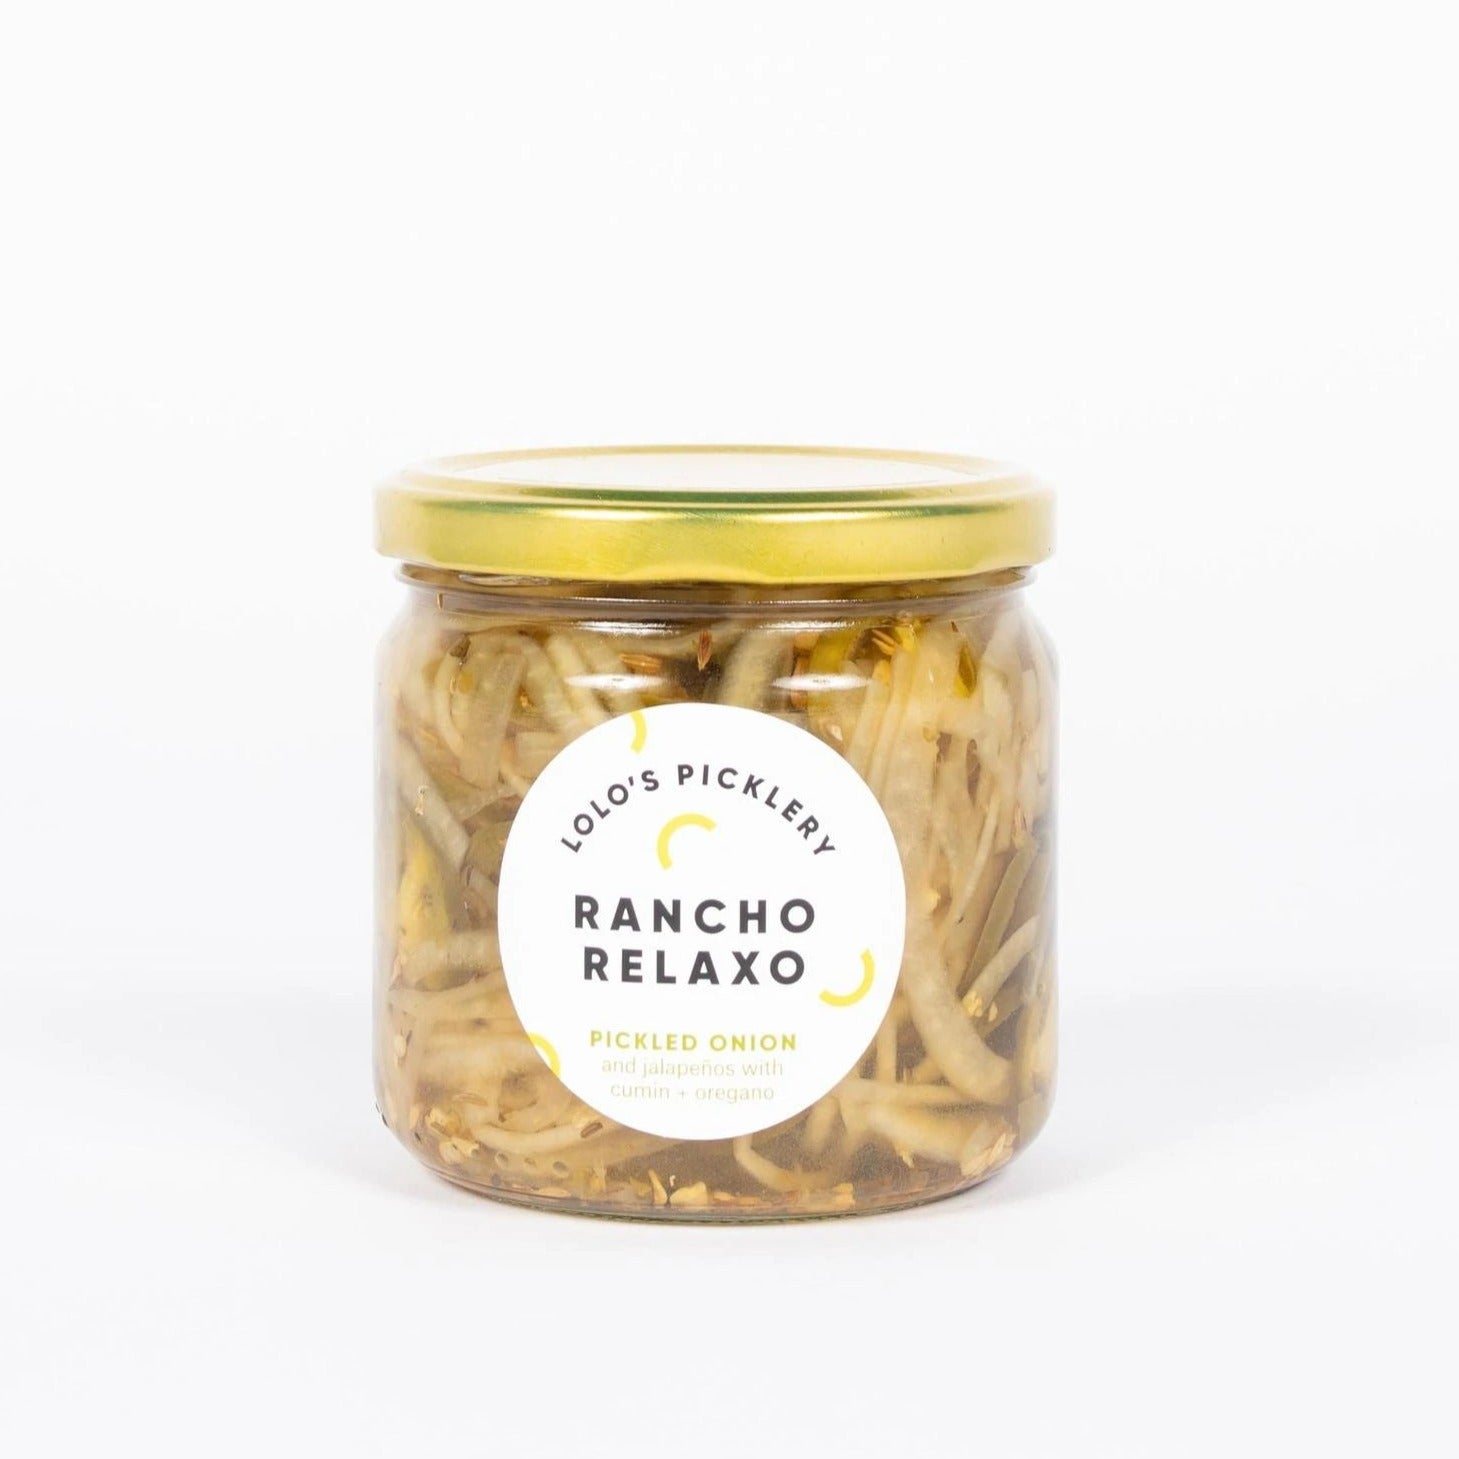 Rancho Relaxo Pickled Onions & Jalapenos